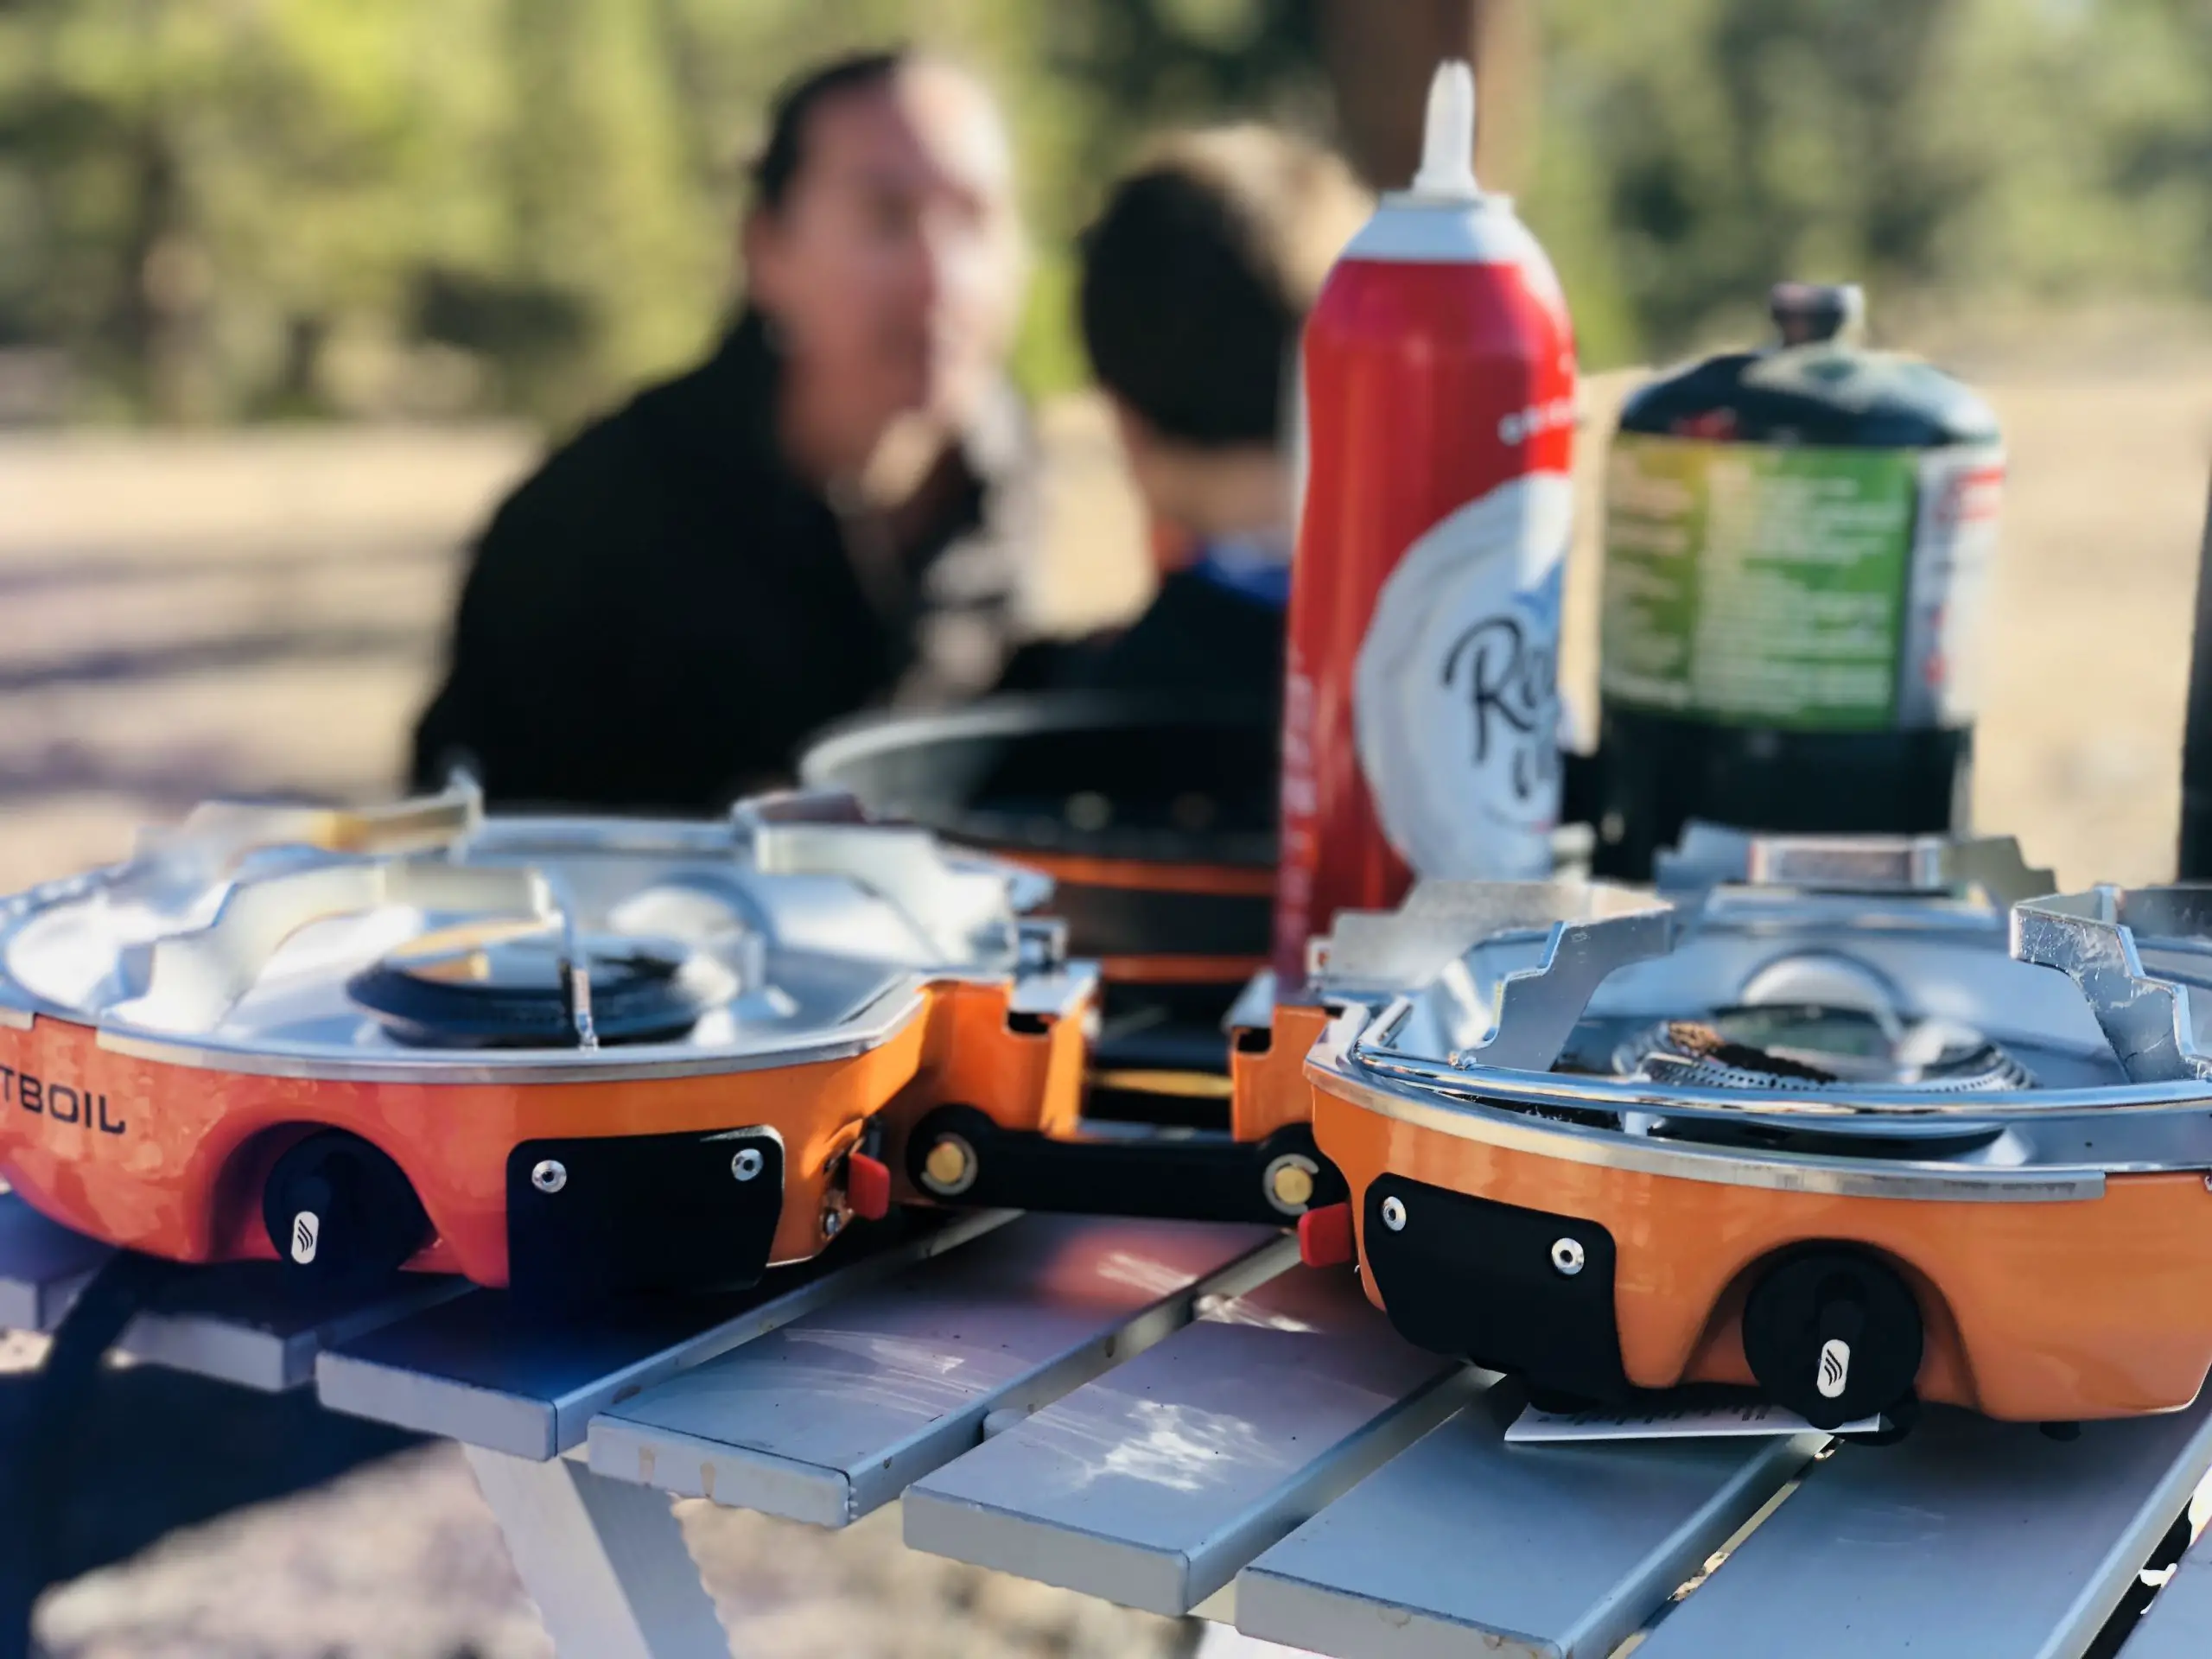 Jetboil's Genesis Base Camp System is the only car camping stove you'll  ever need